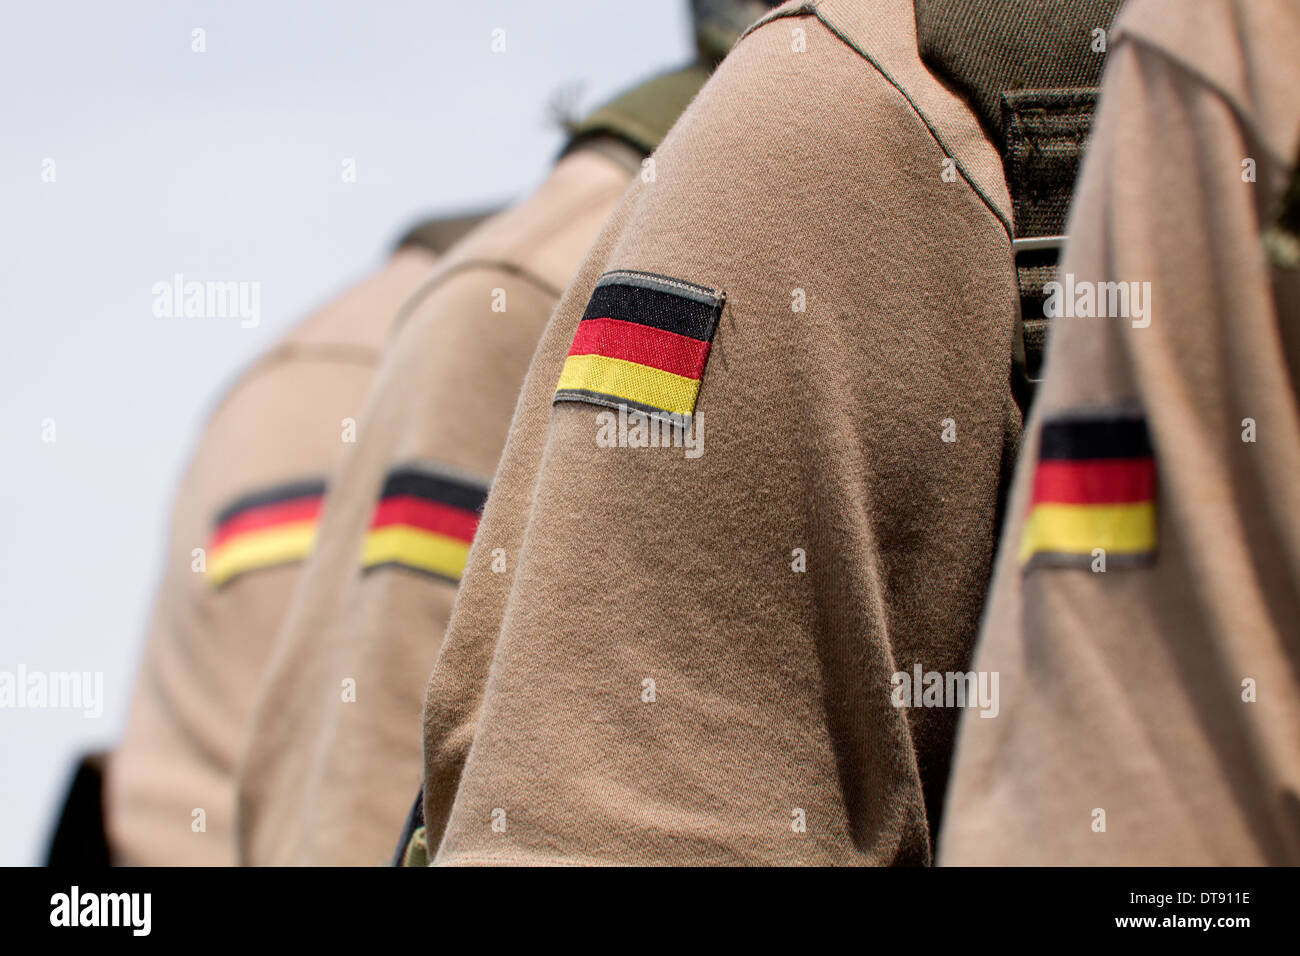 Bundeswehr soldiers sleeve patches Stock Photo